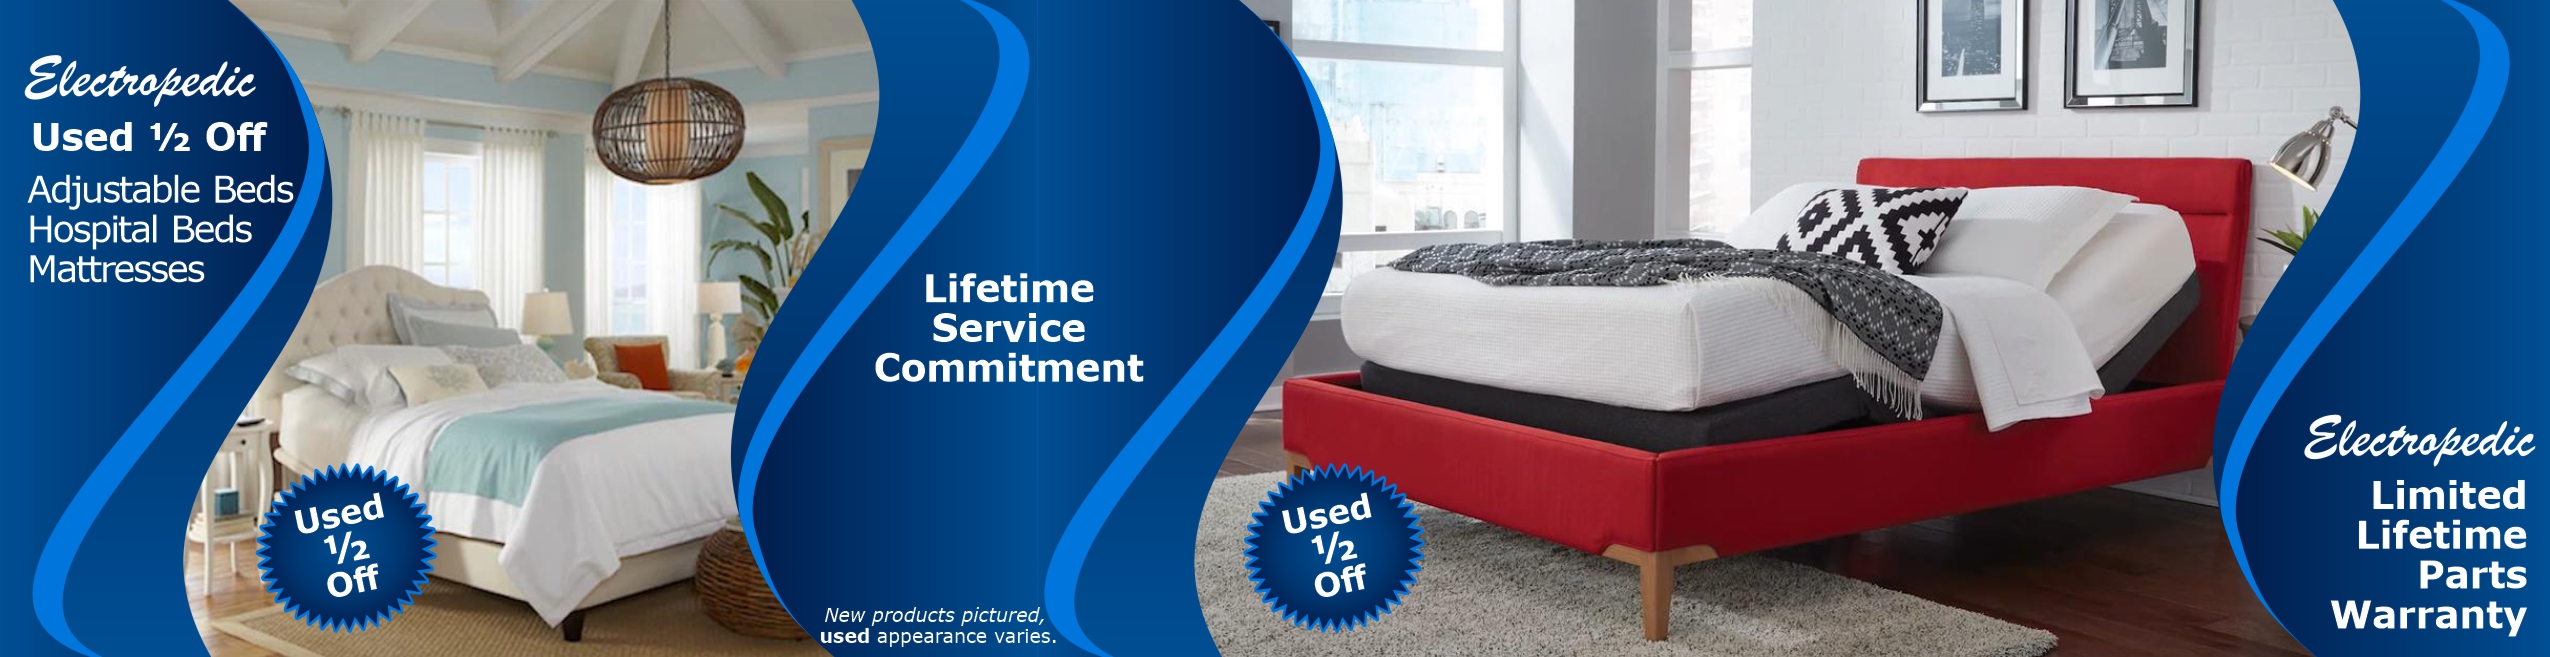 Used Adjustable Beds & Mattresses ½ Off